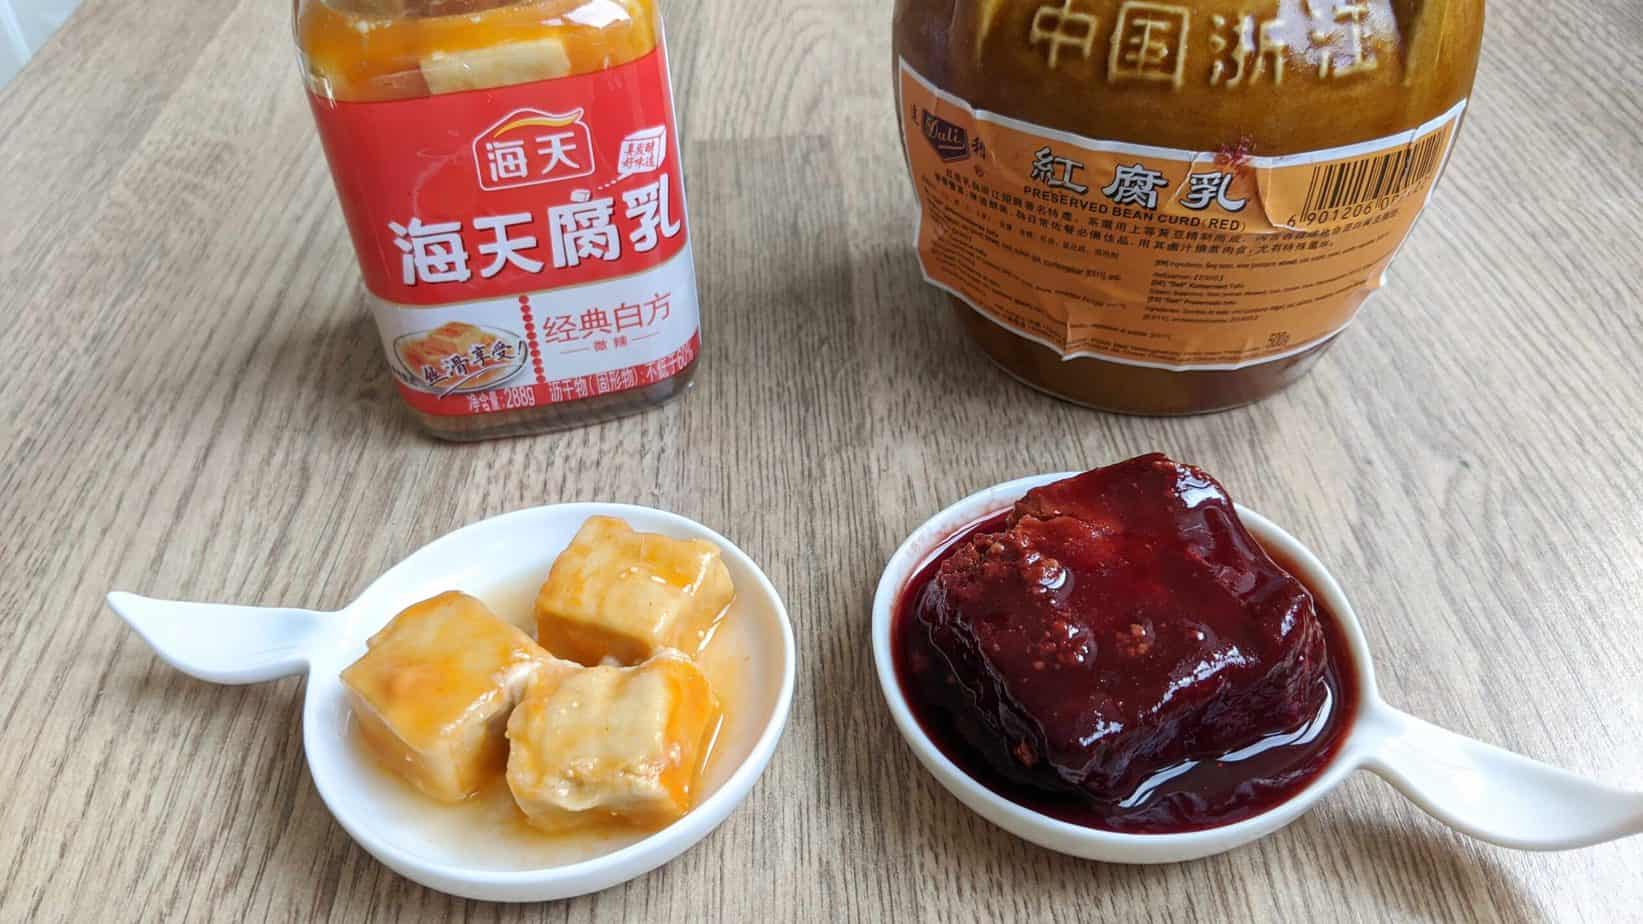 Two types of fermented bean curd